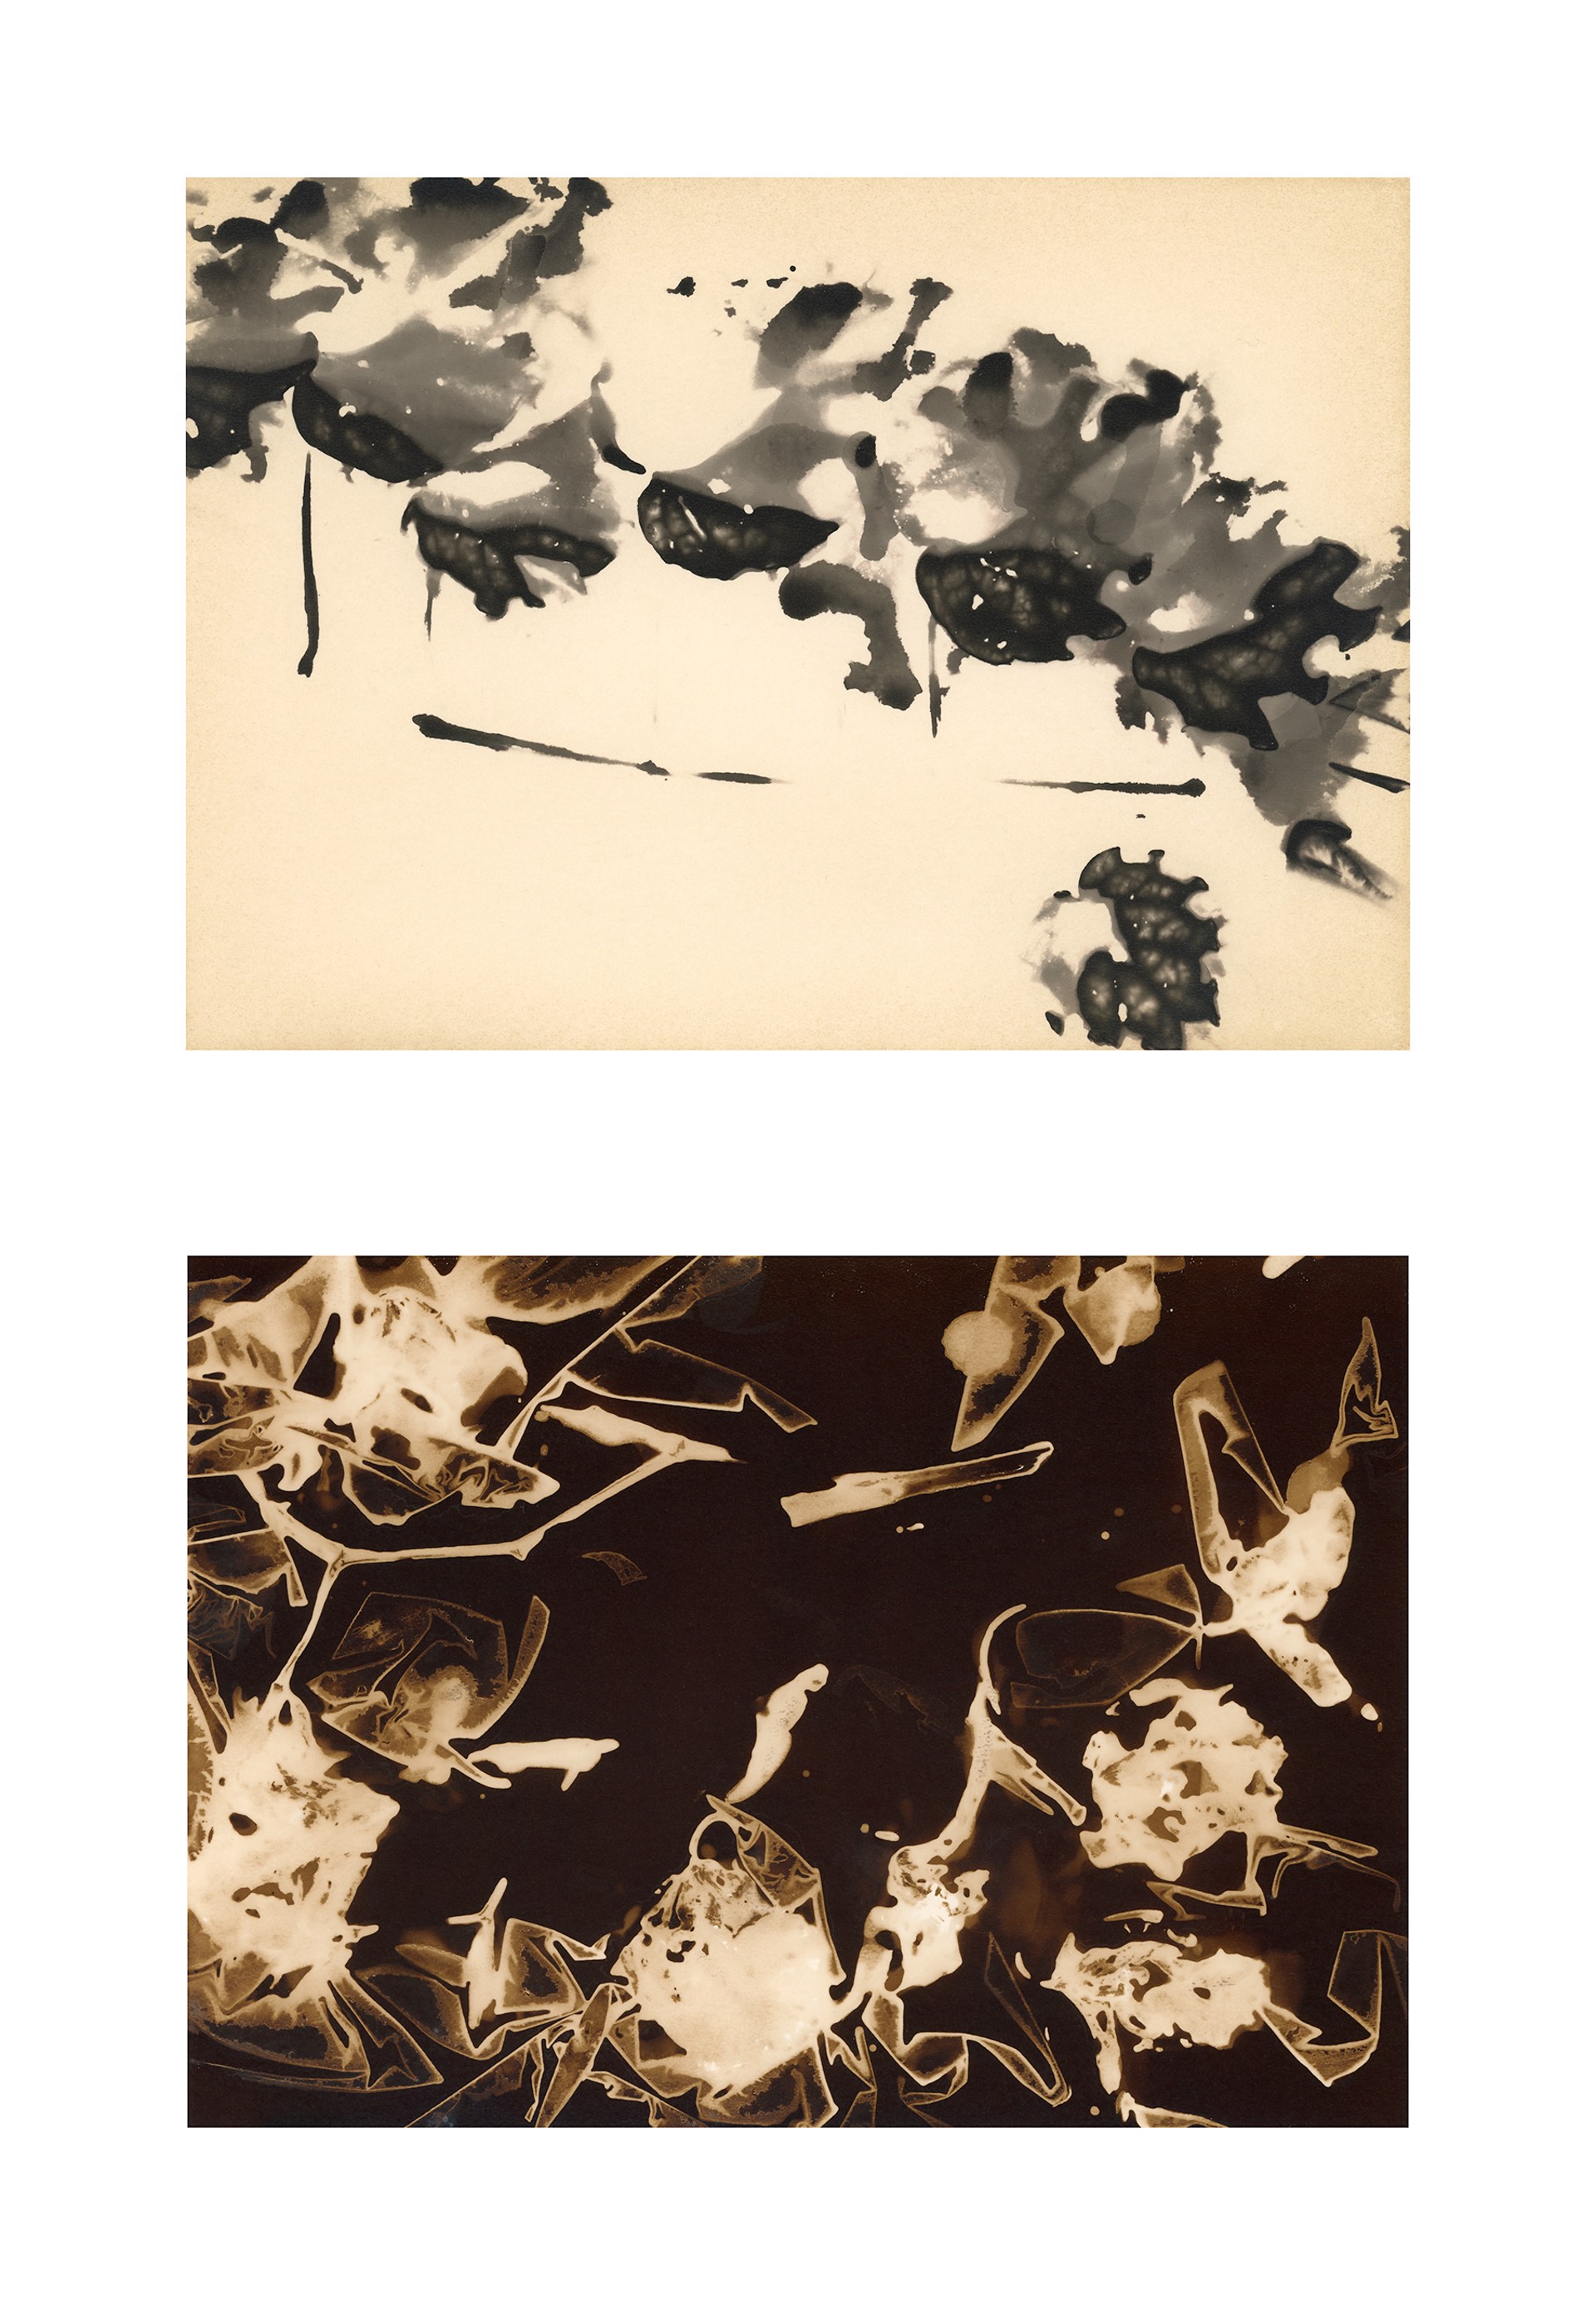 Creeping Fig Vine, fixed-positive, diptych by Teresa K. Morrison